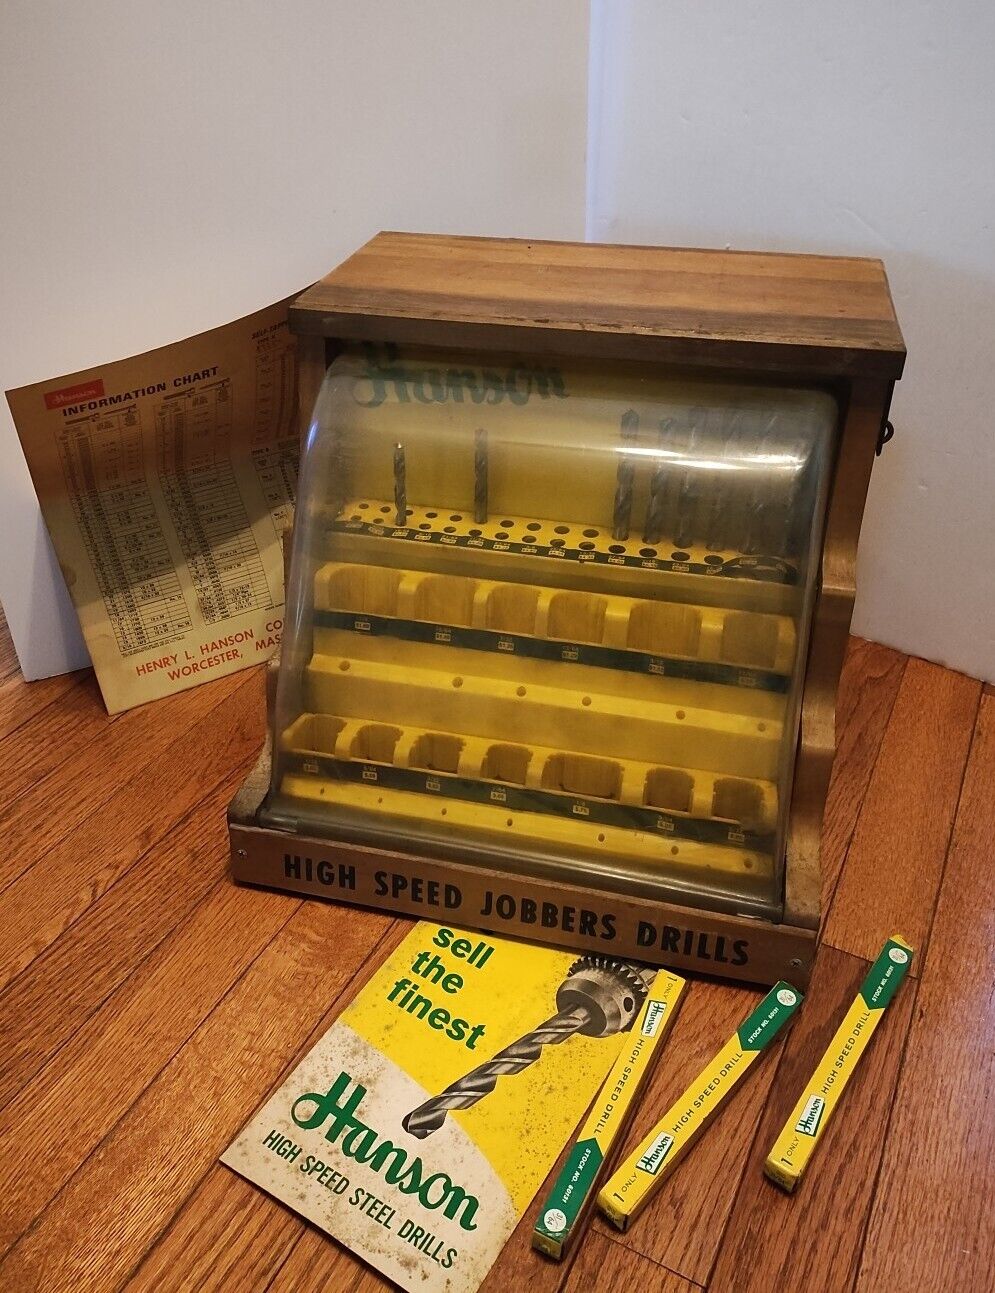 Vintage Hardware Store Display Hanson High Speed Drills, Oak, Guide, Products 